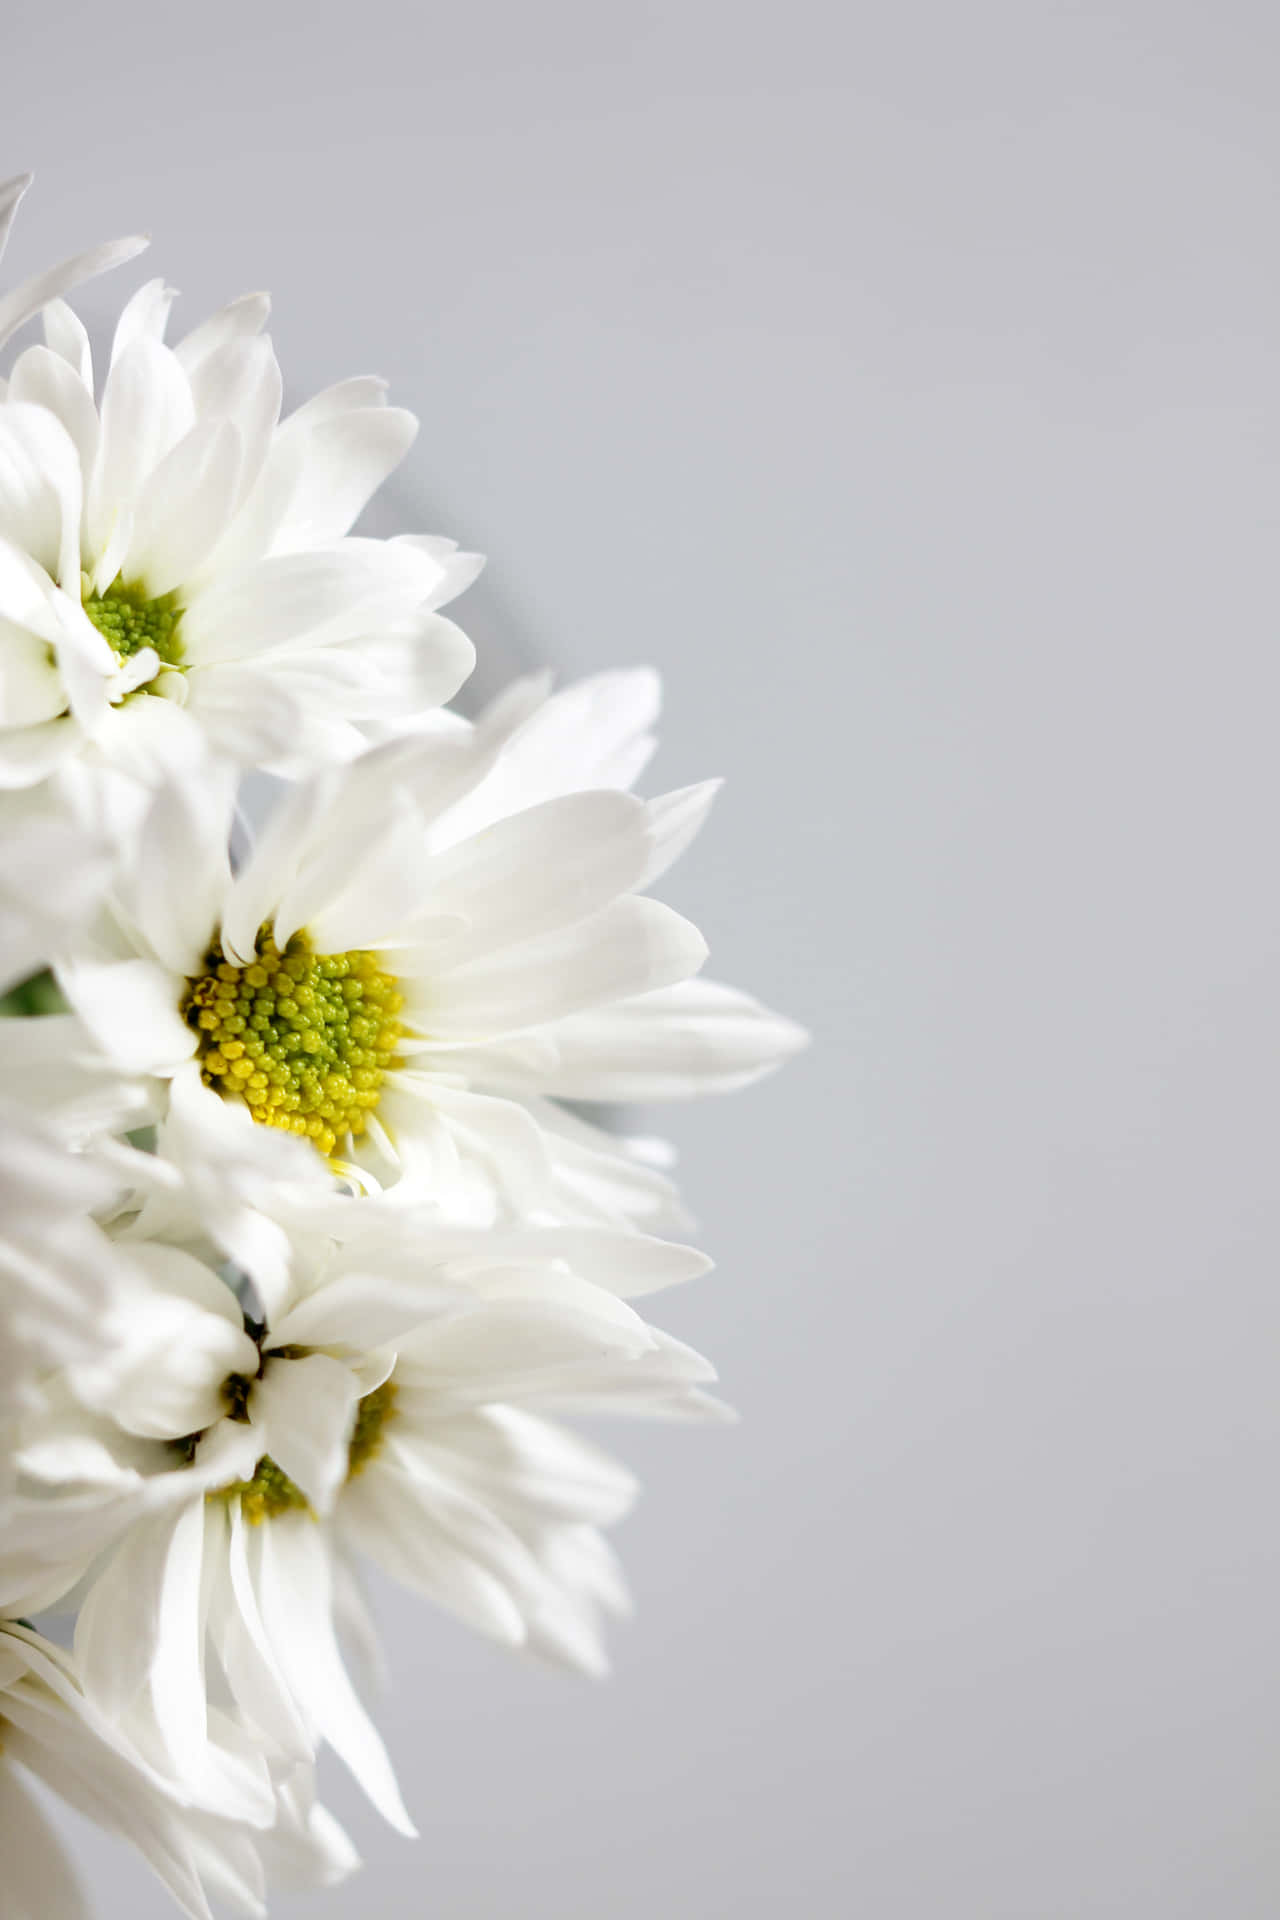 White Daisies In A Vase On A Gray Background